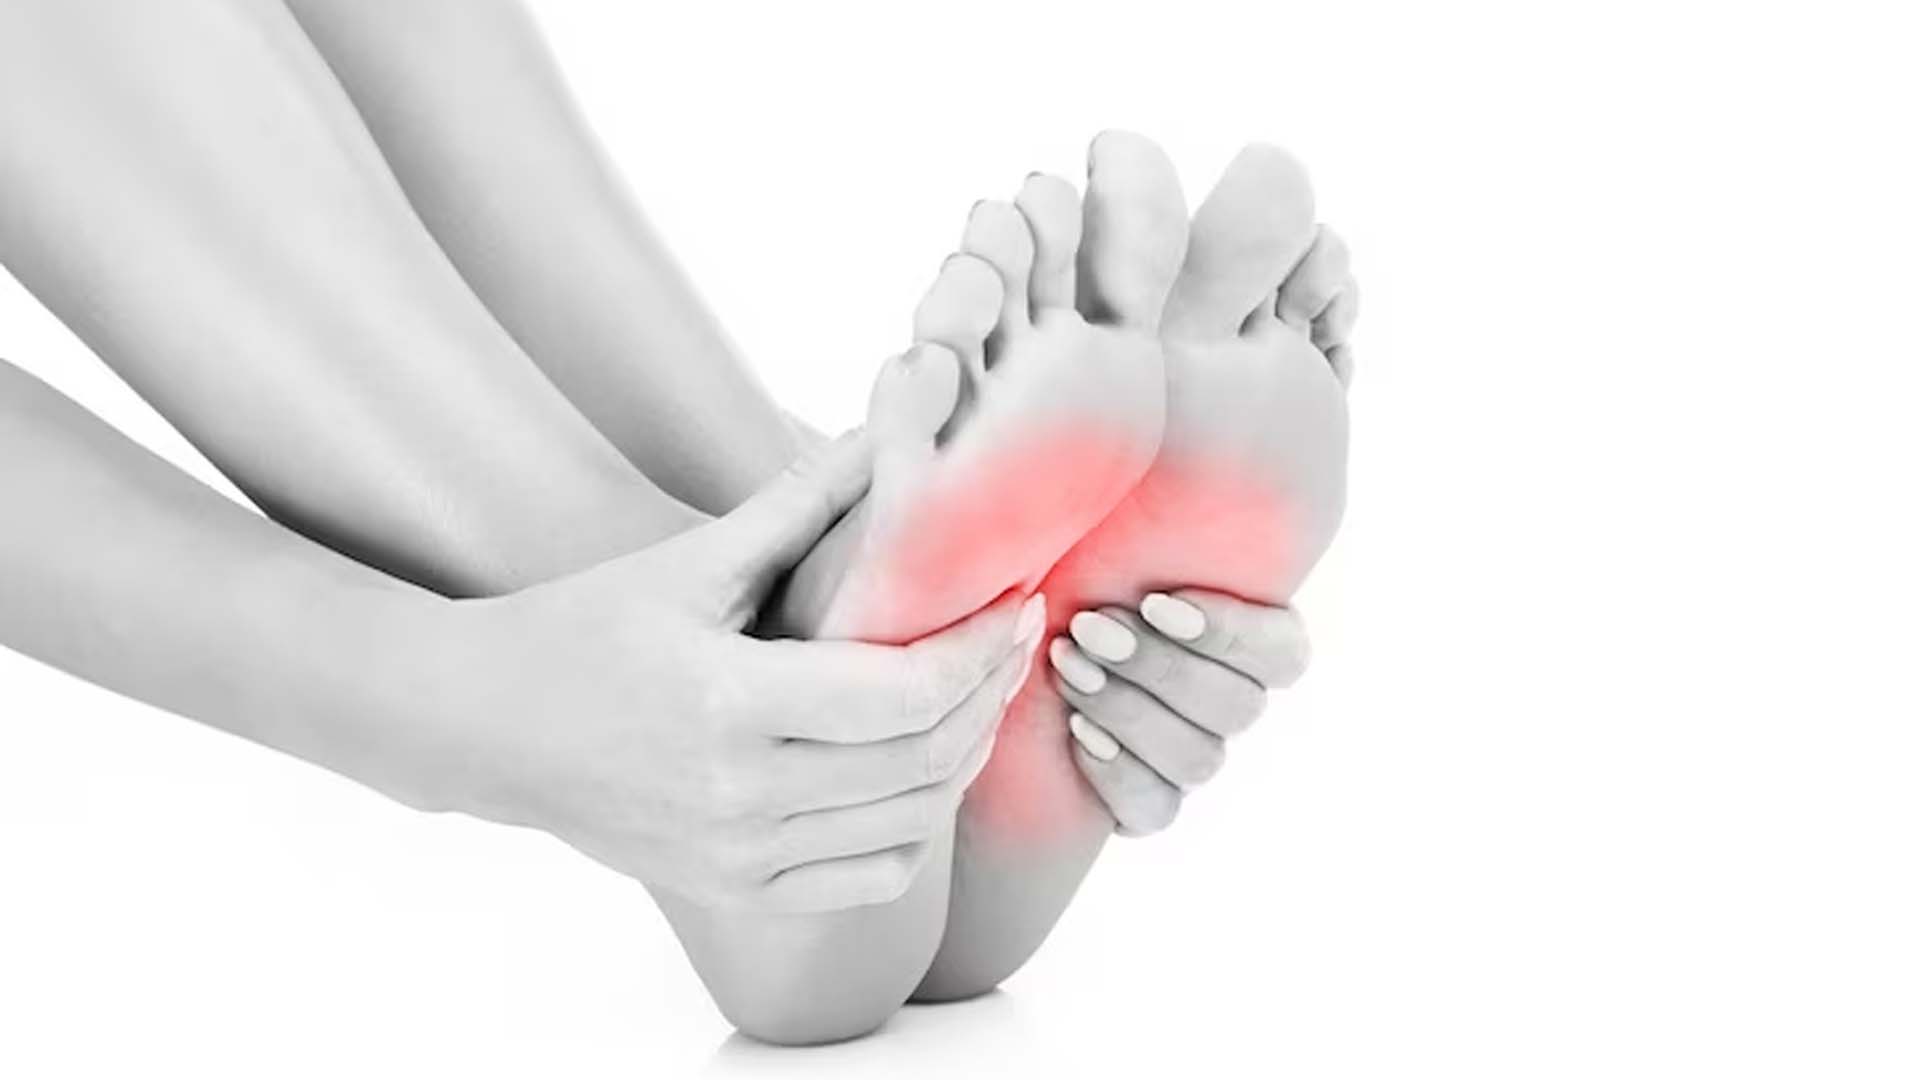 women Holding Feet with Cramps or pain